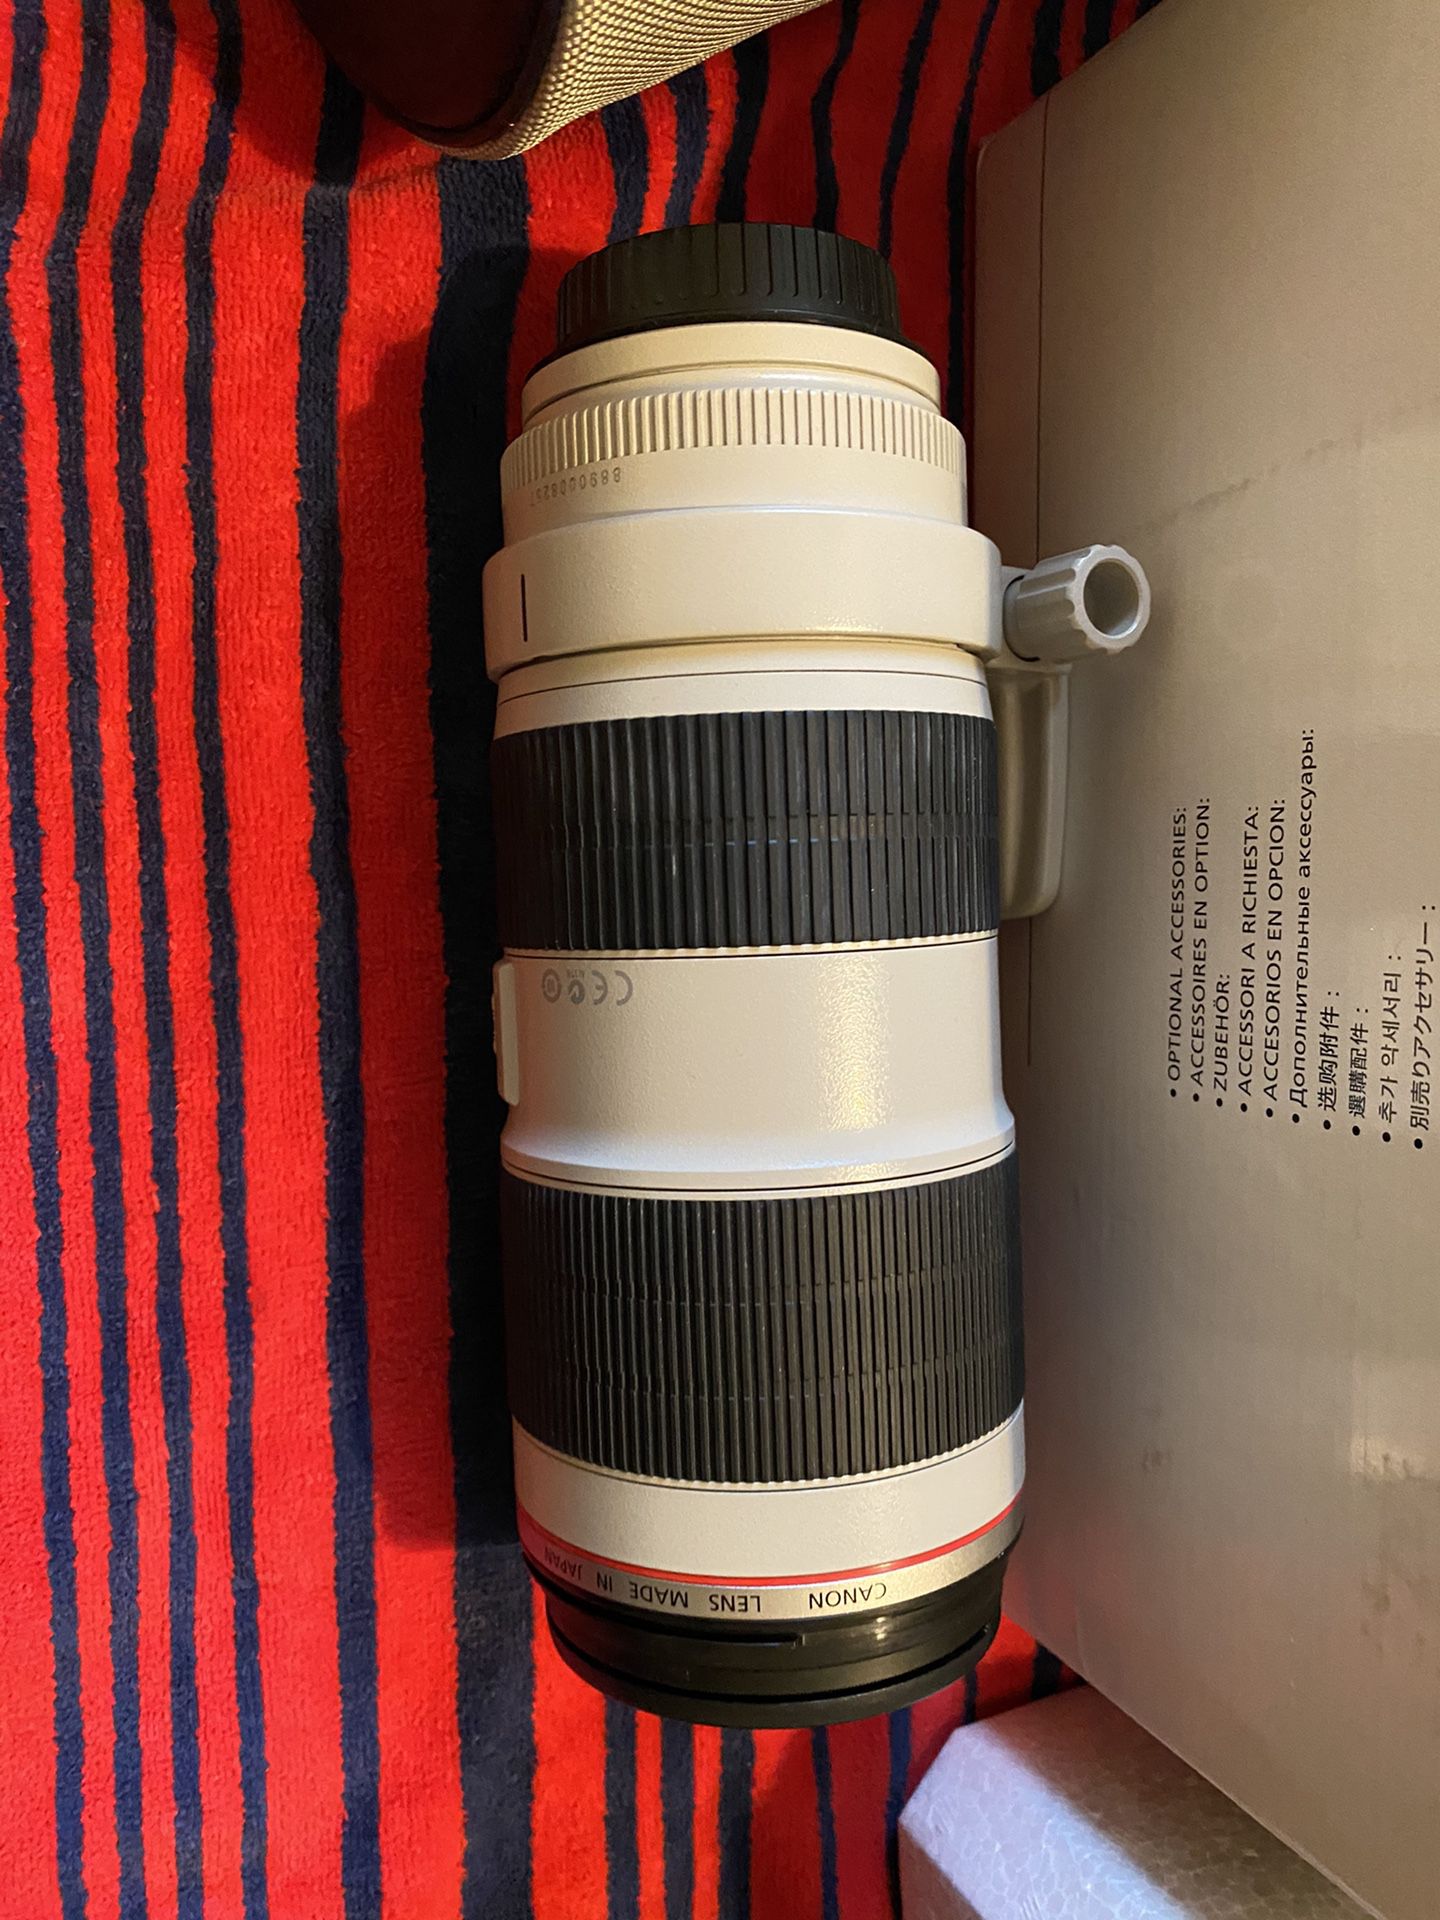 Canon - EF 70-200mm f/2.8L IS III